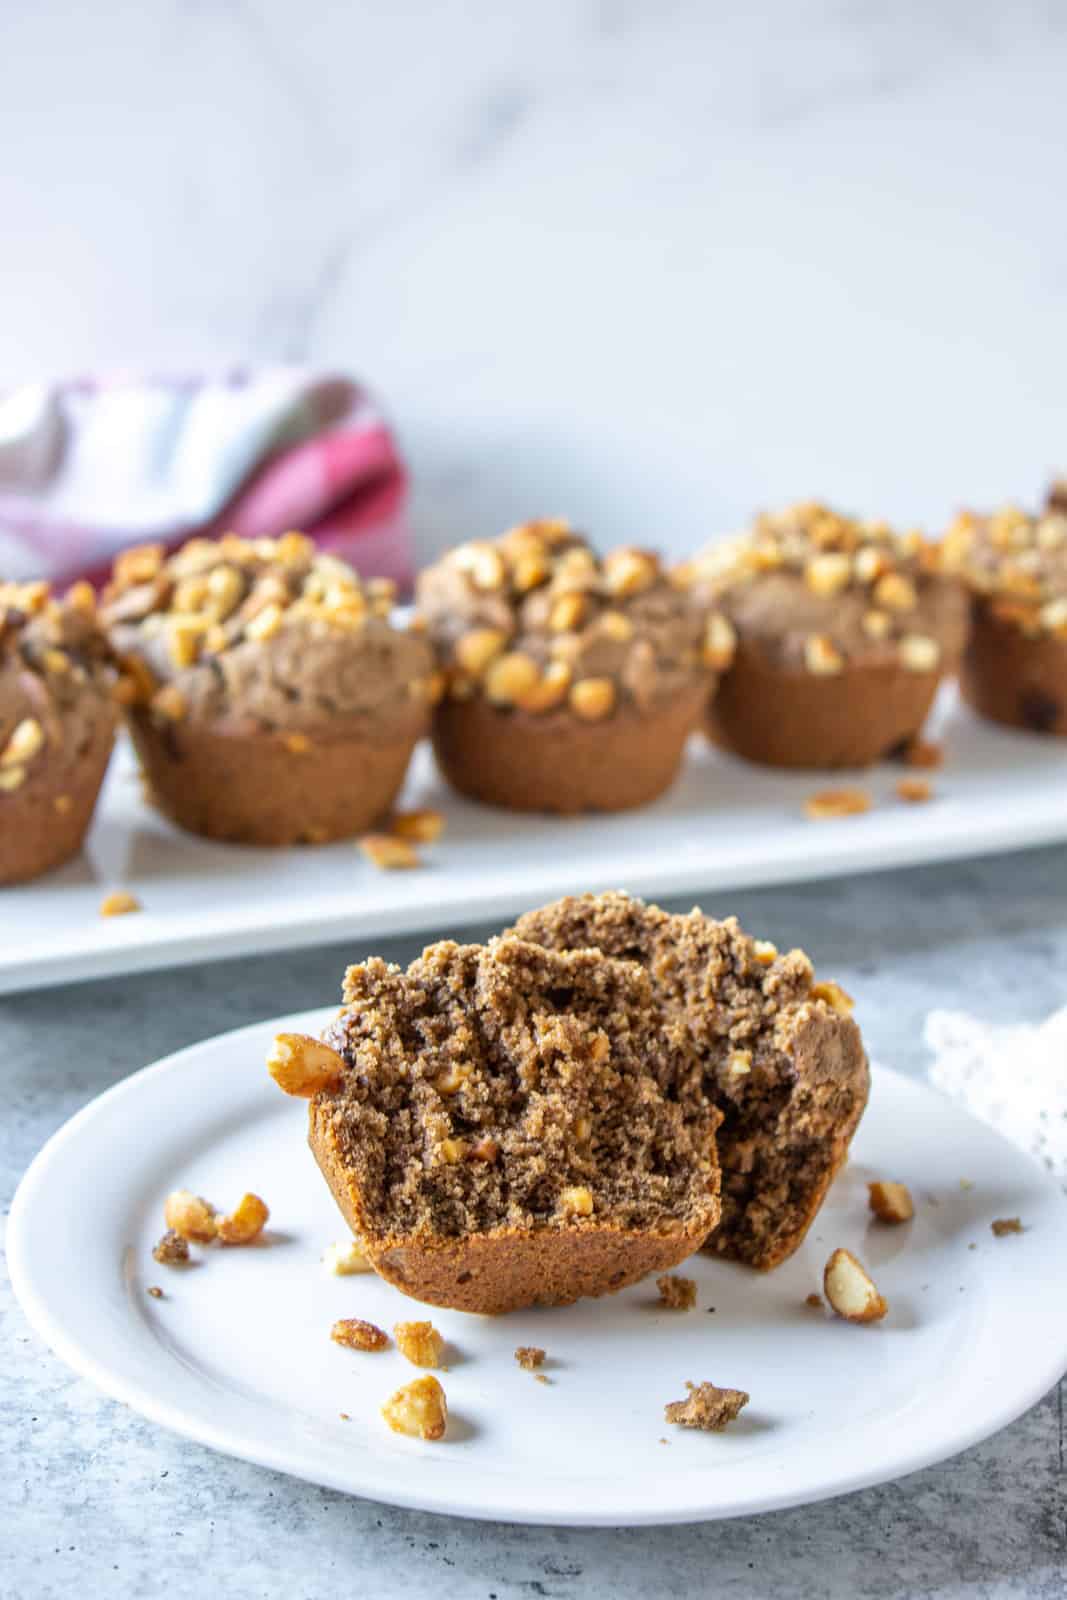 A chocolate muffin filled with chocolate chips and topped with chopped peanuts on a white plate.